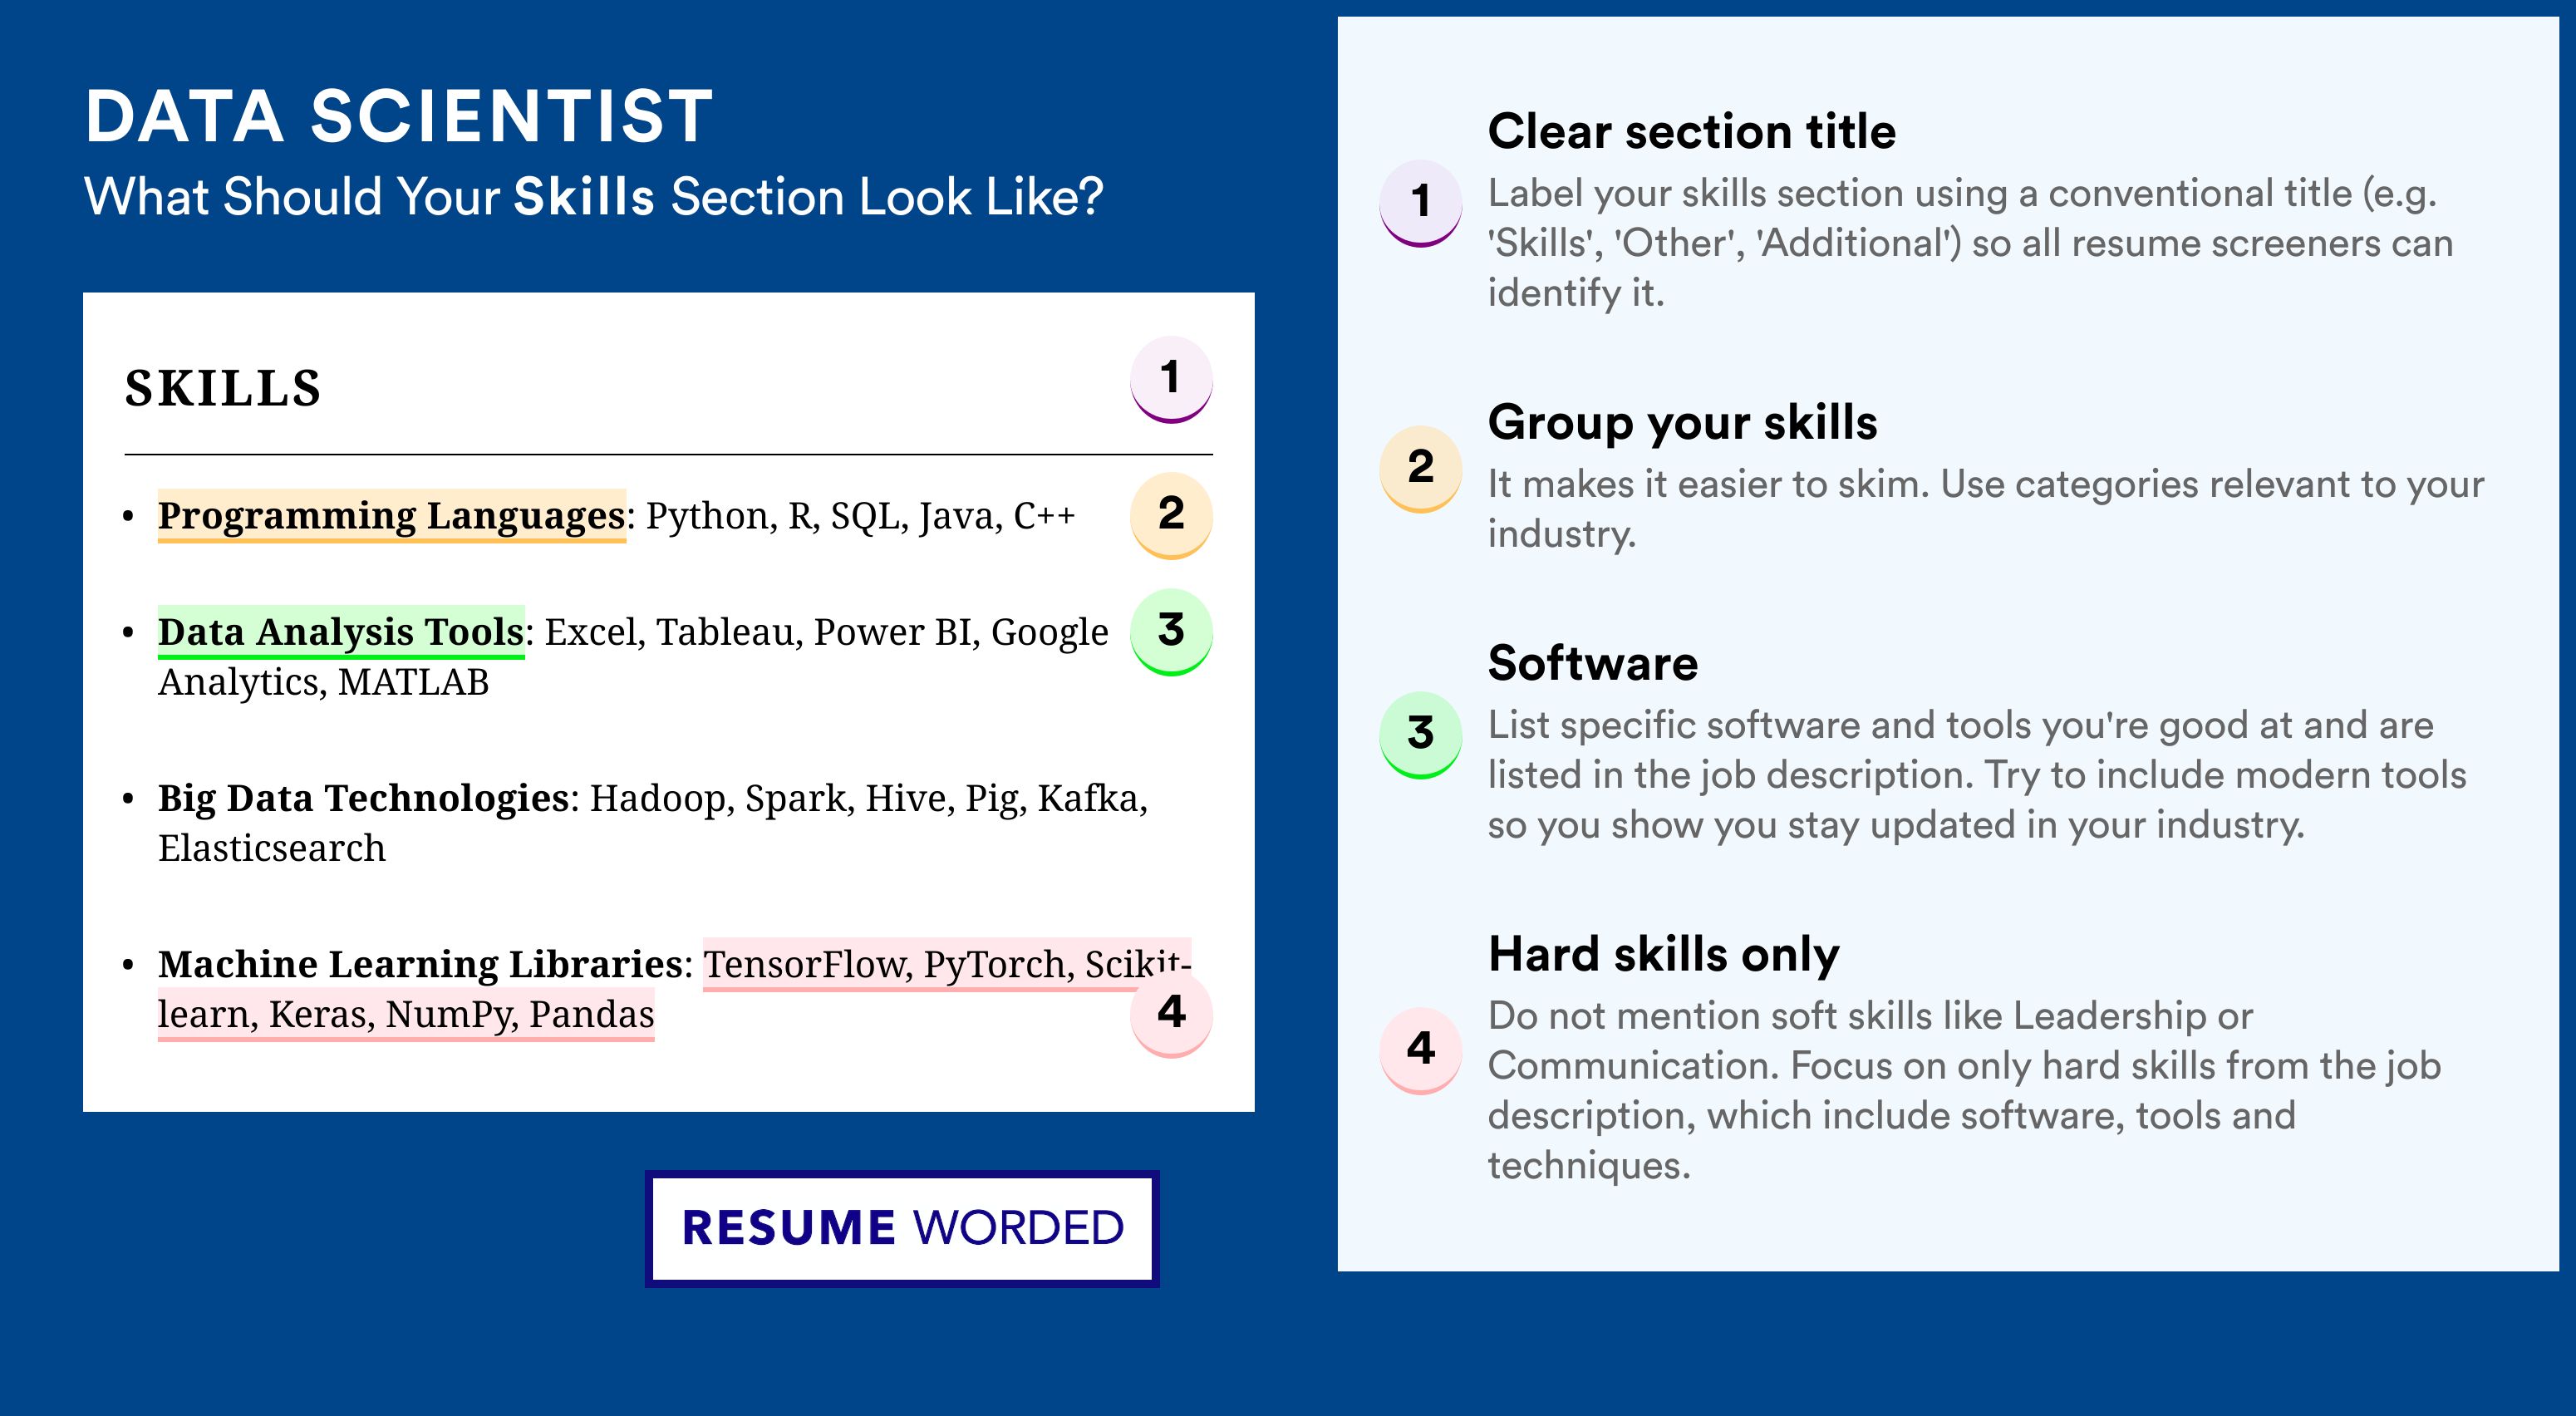 How To Write Your Skills Section - Data Scientist Roles